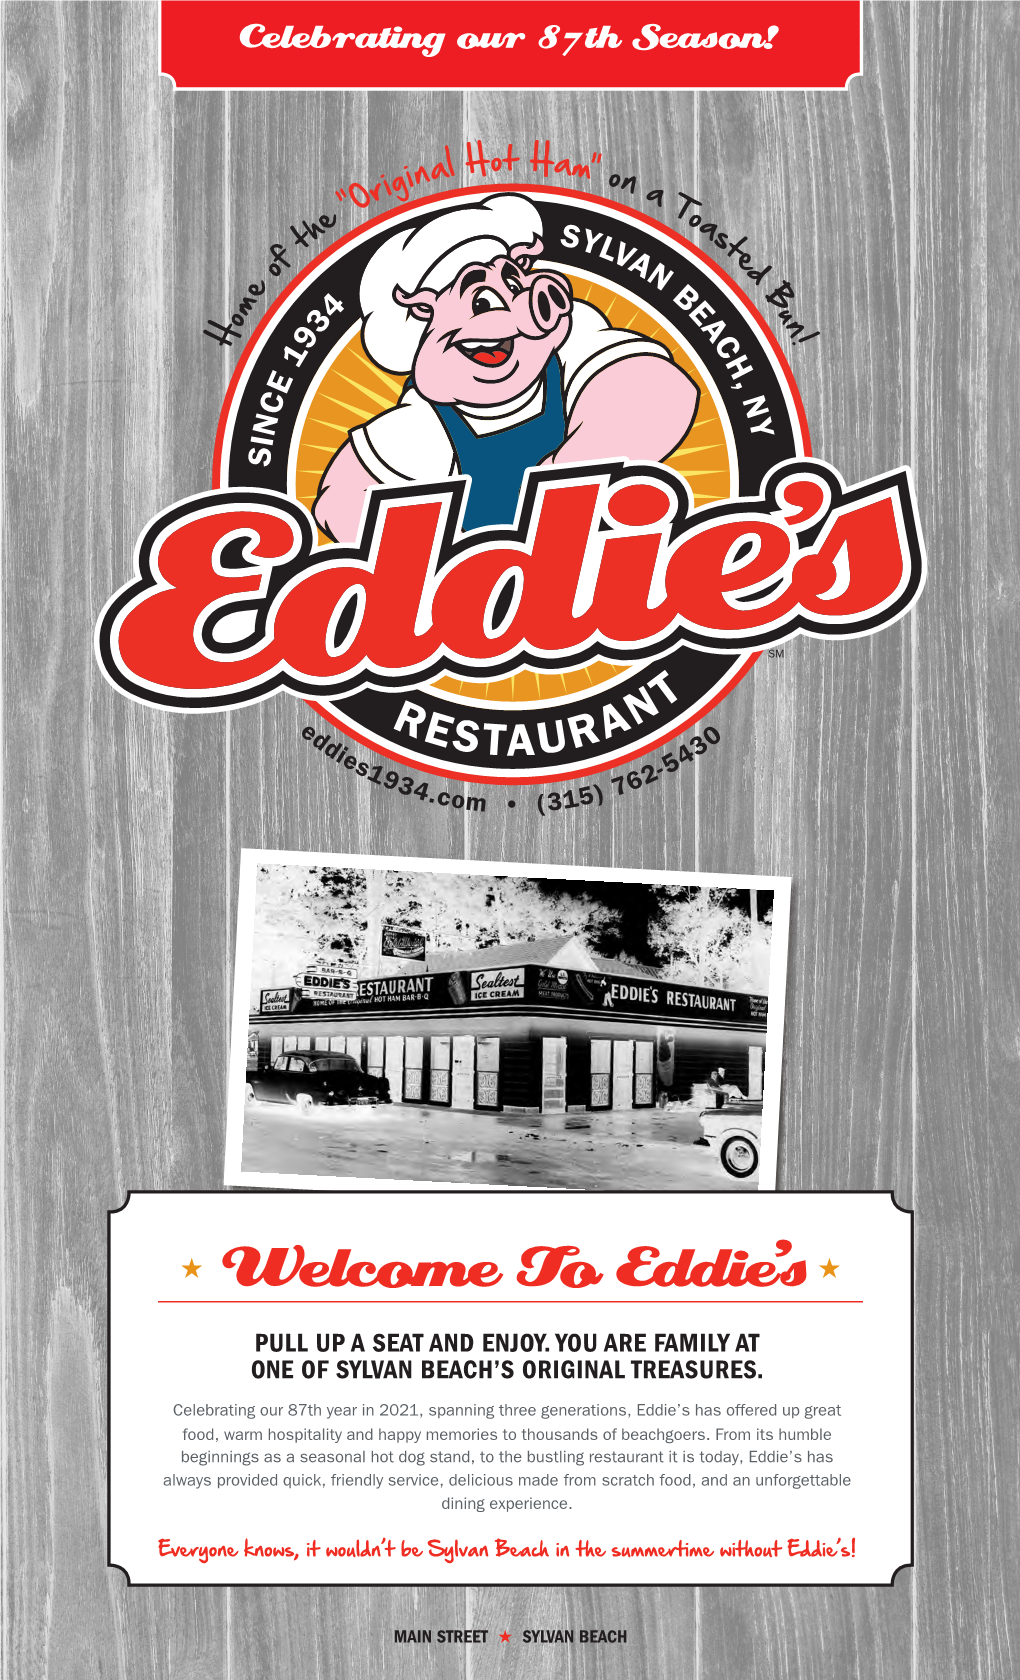 Welcome to Eddie's